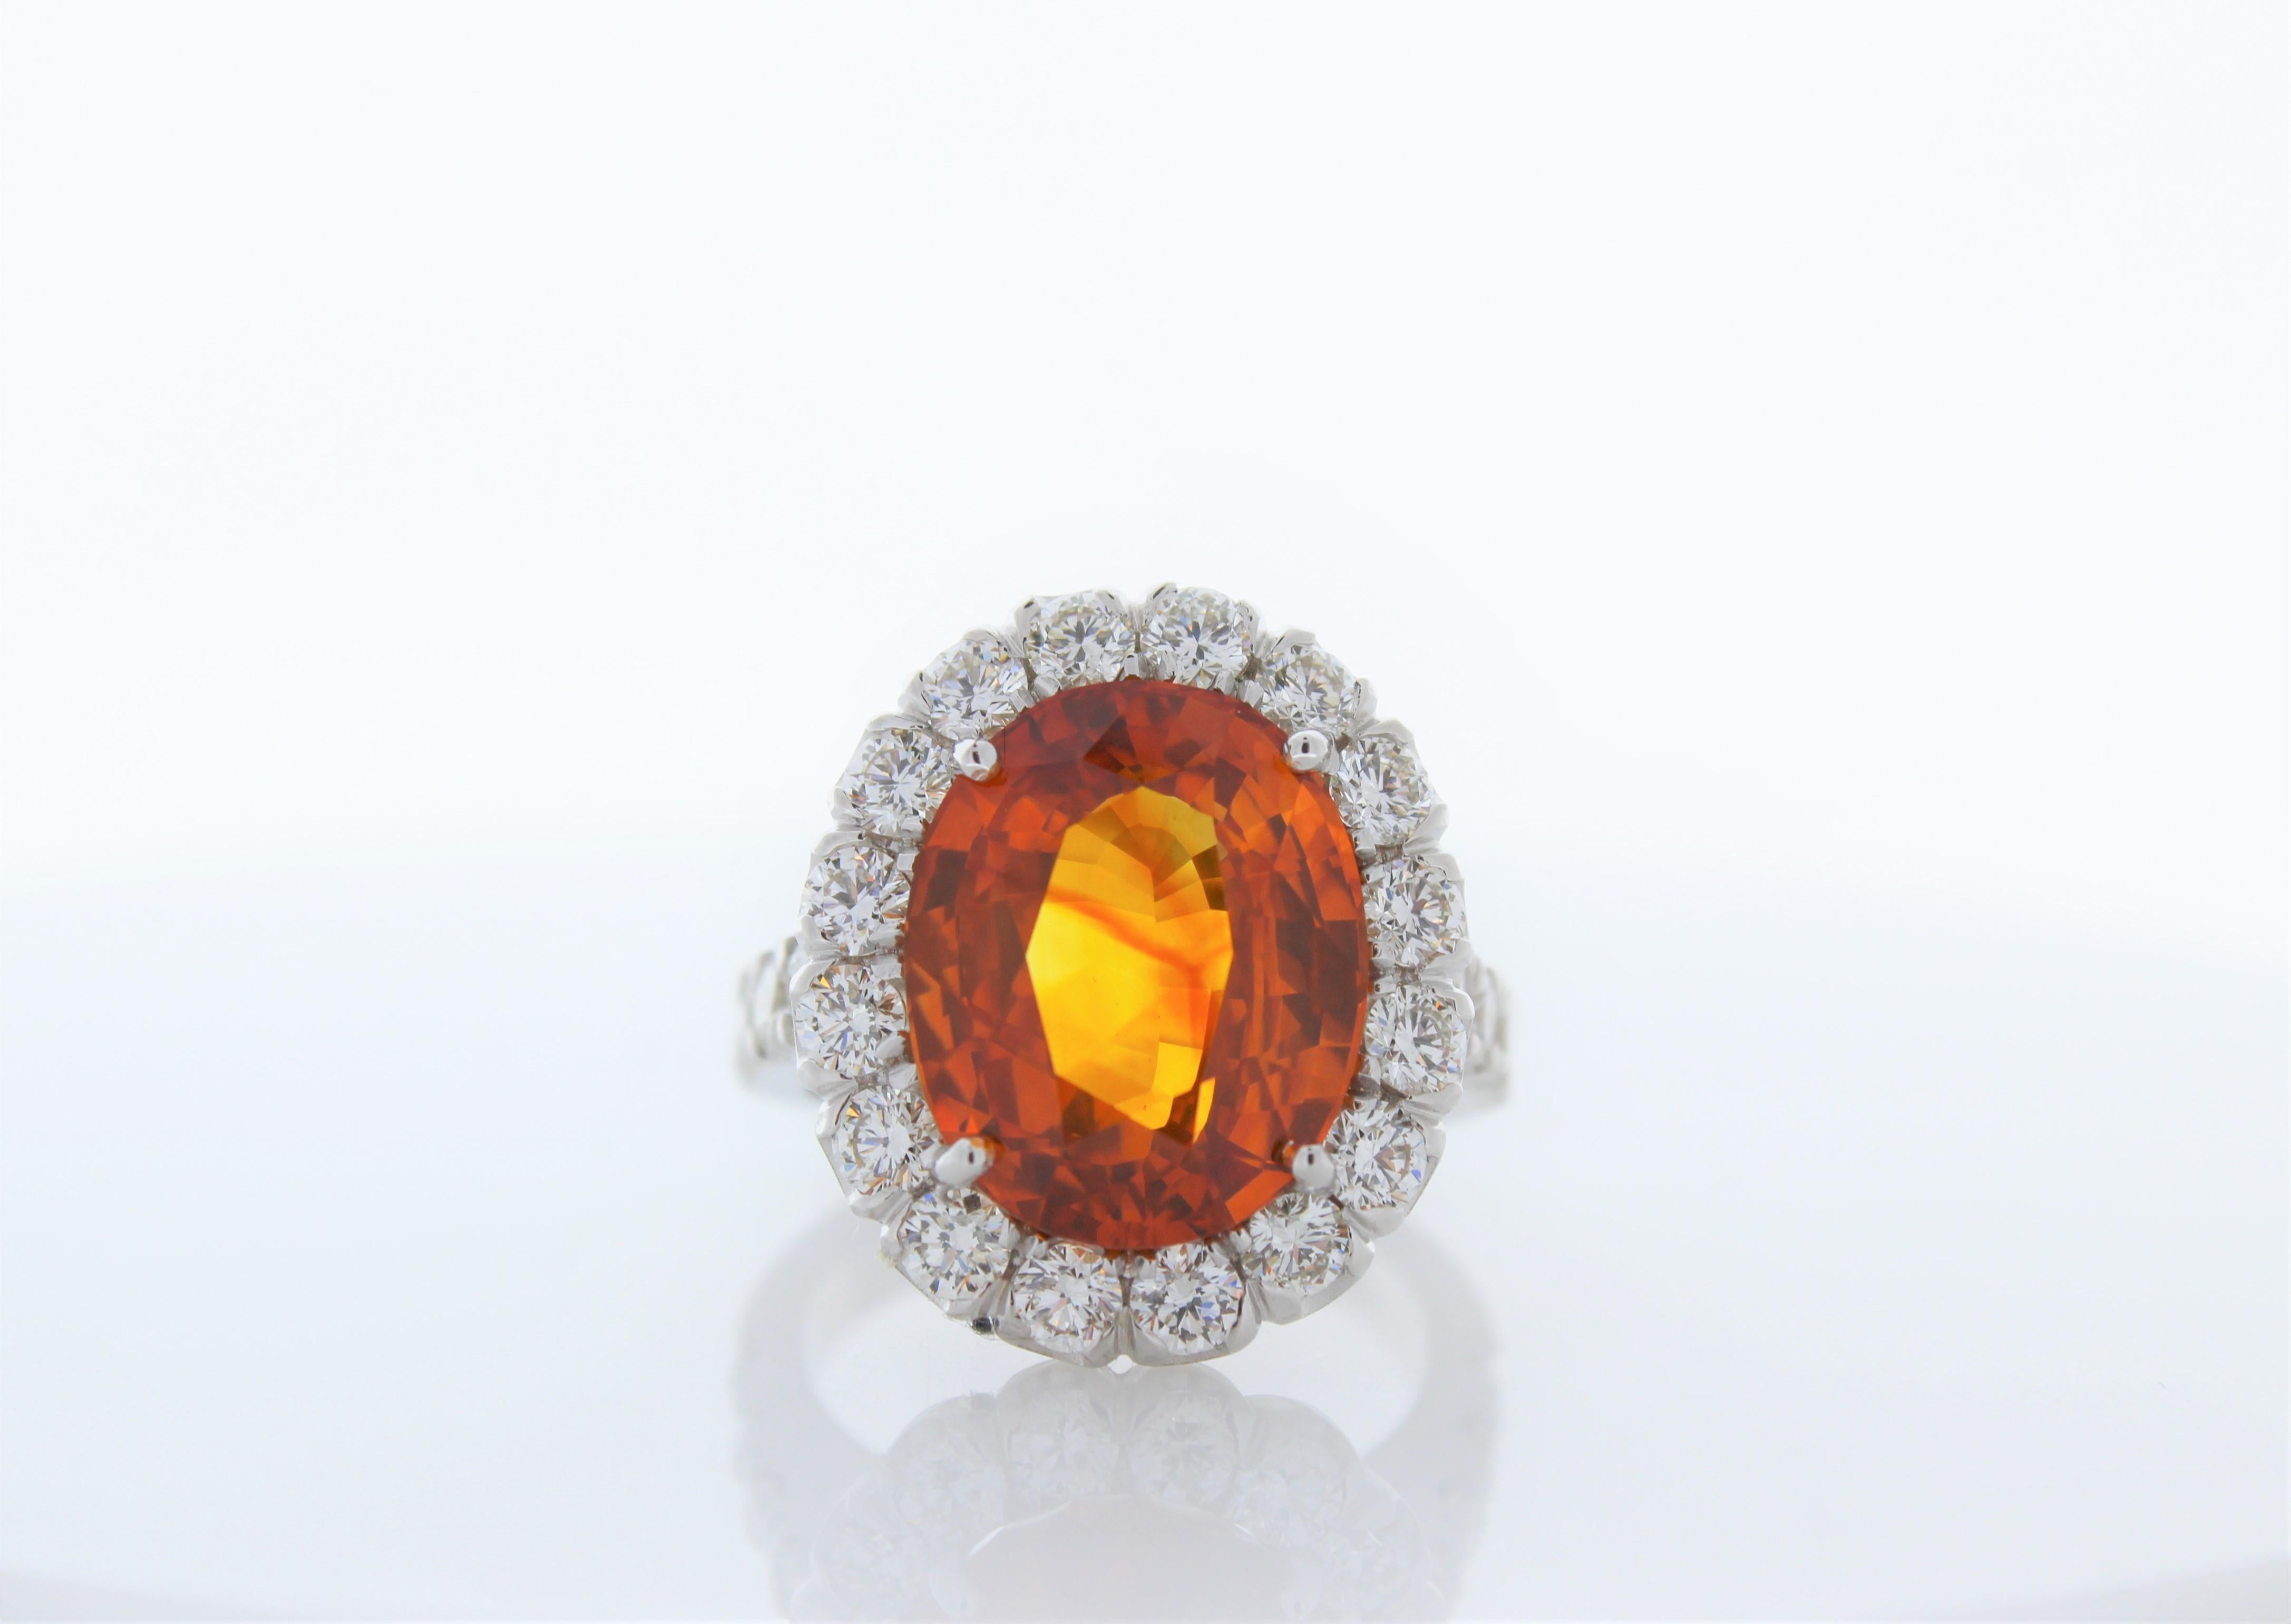 Contemporary 10.47 Carat Oval Orange Sapphire and Diamond Ring in 18K White Gold For Sale